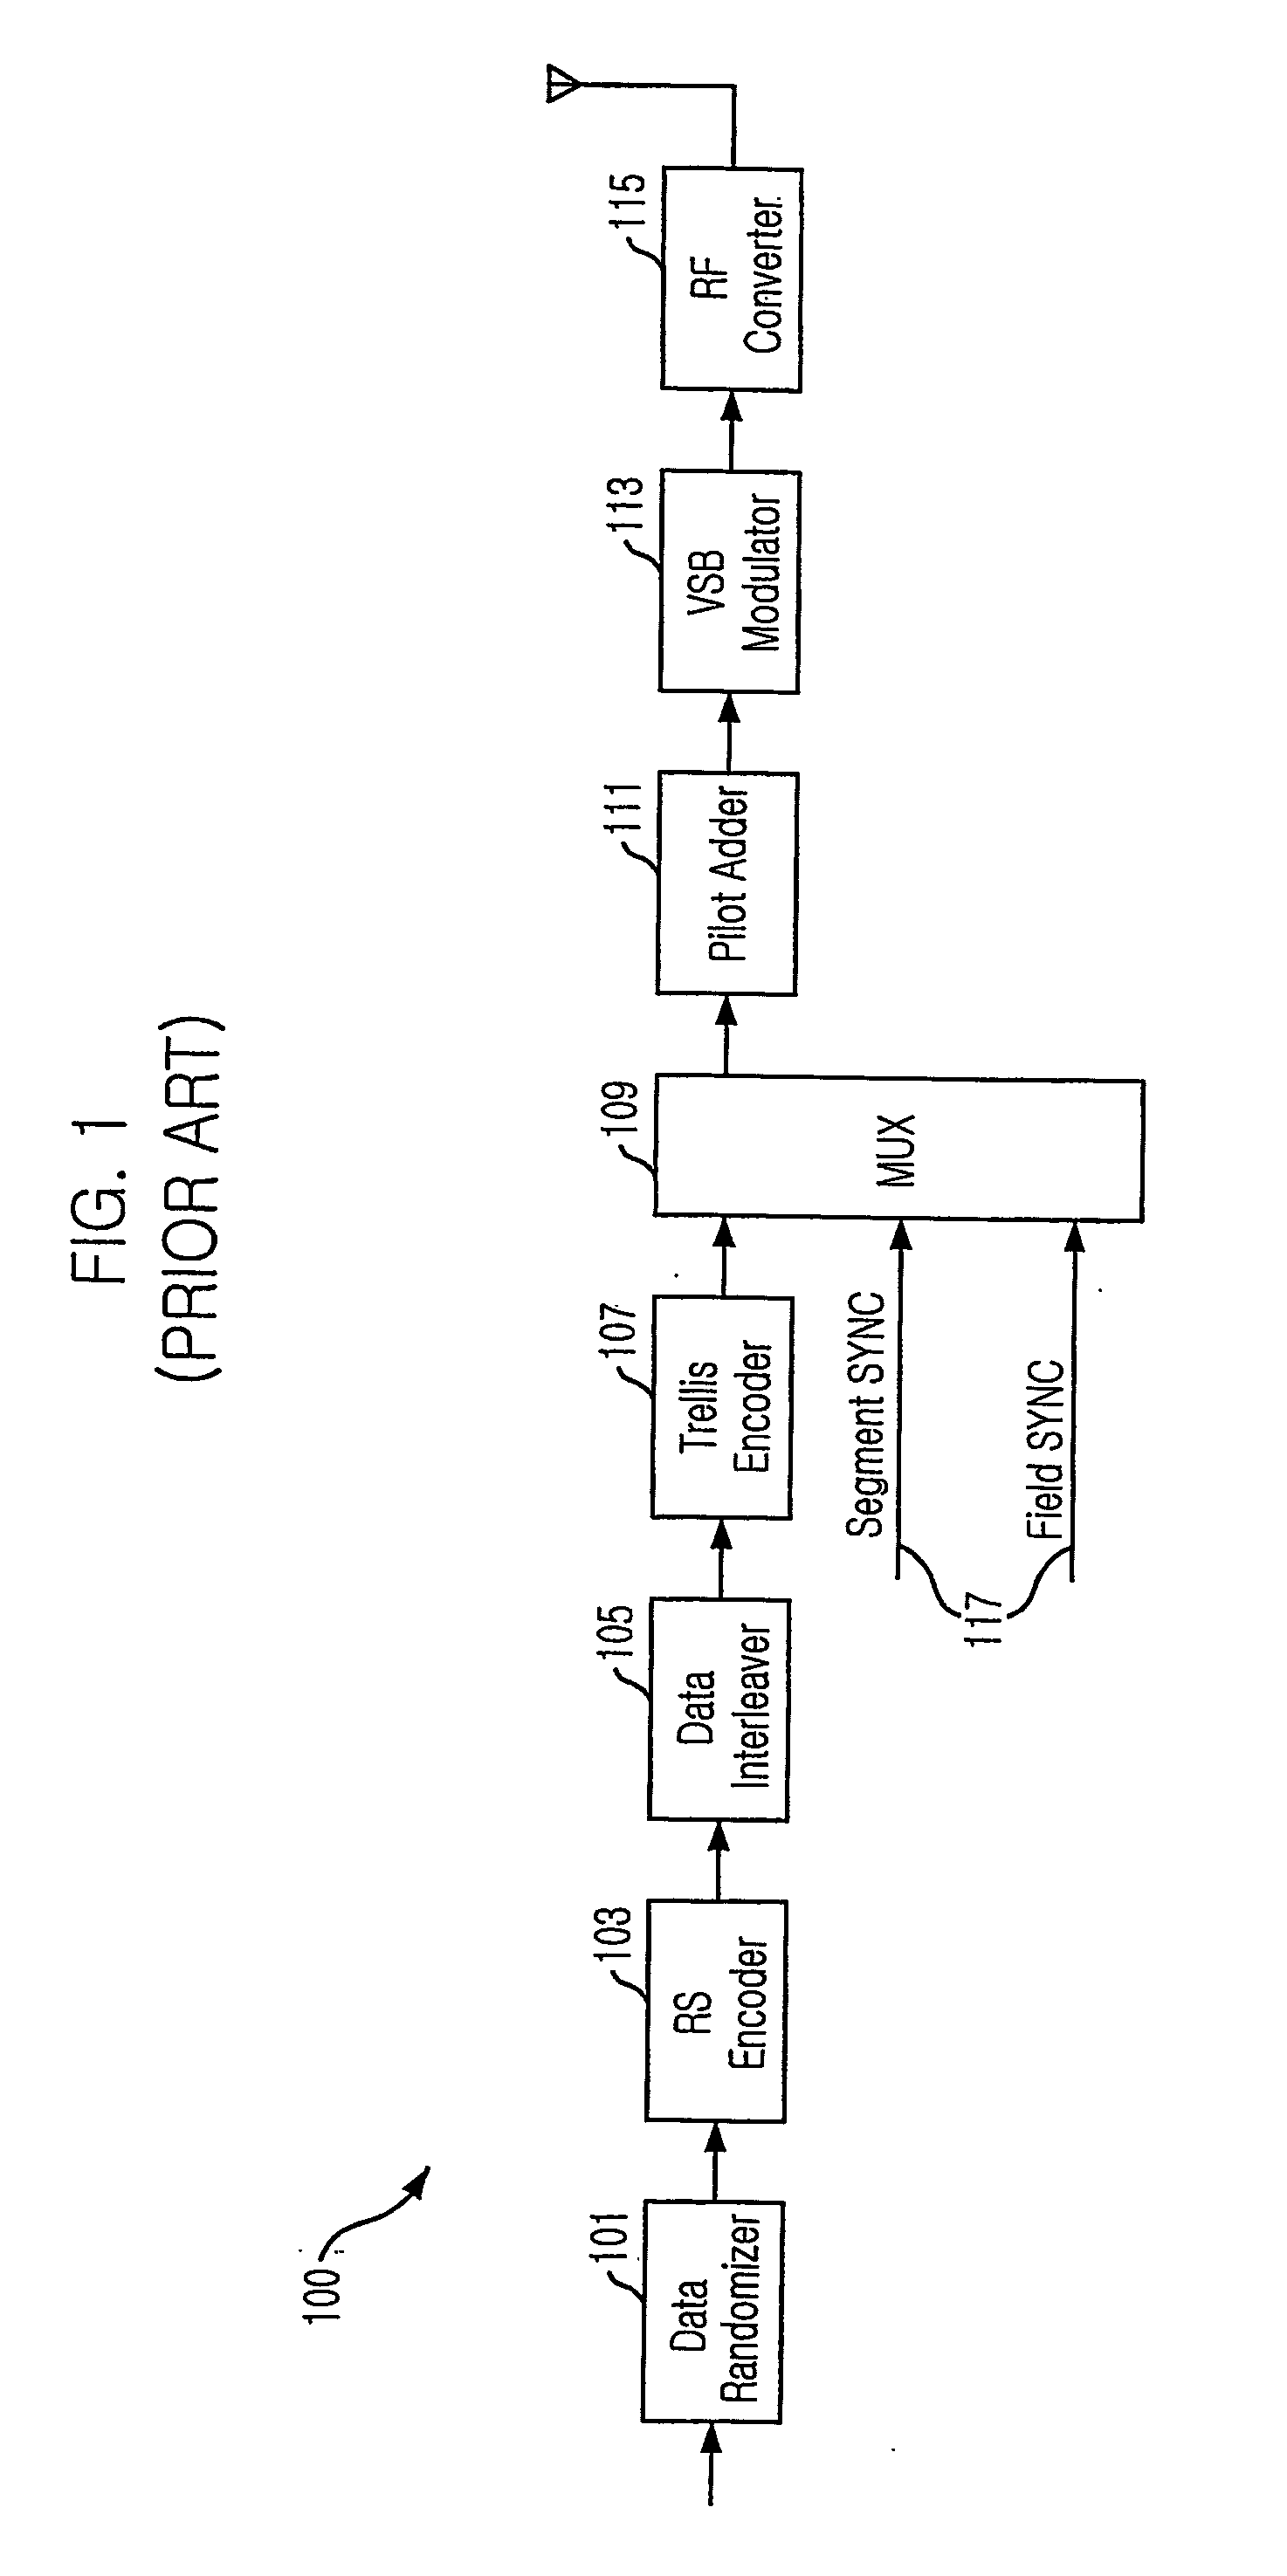 Digital television transmitter and receiver for transmitting and receiving dual stream using 4 level vestigial side band robust data